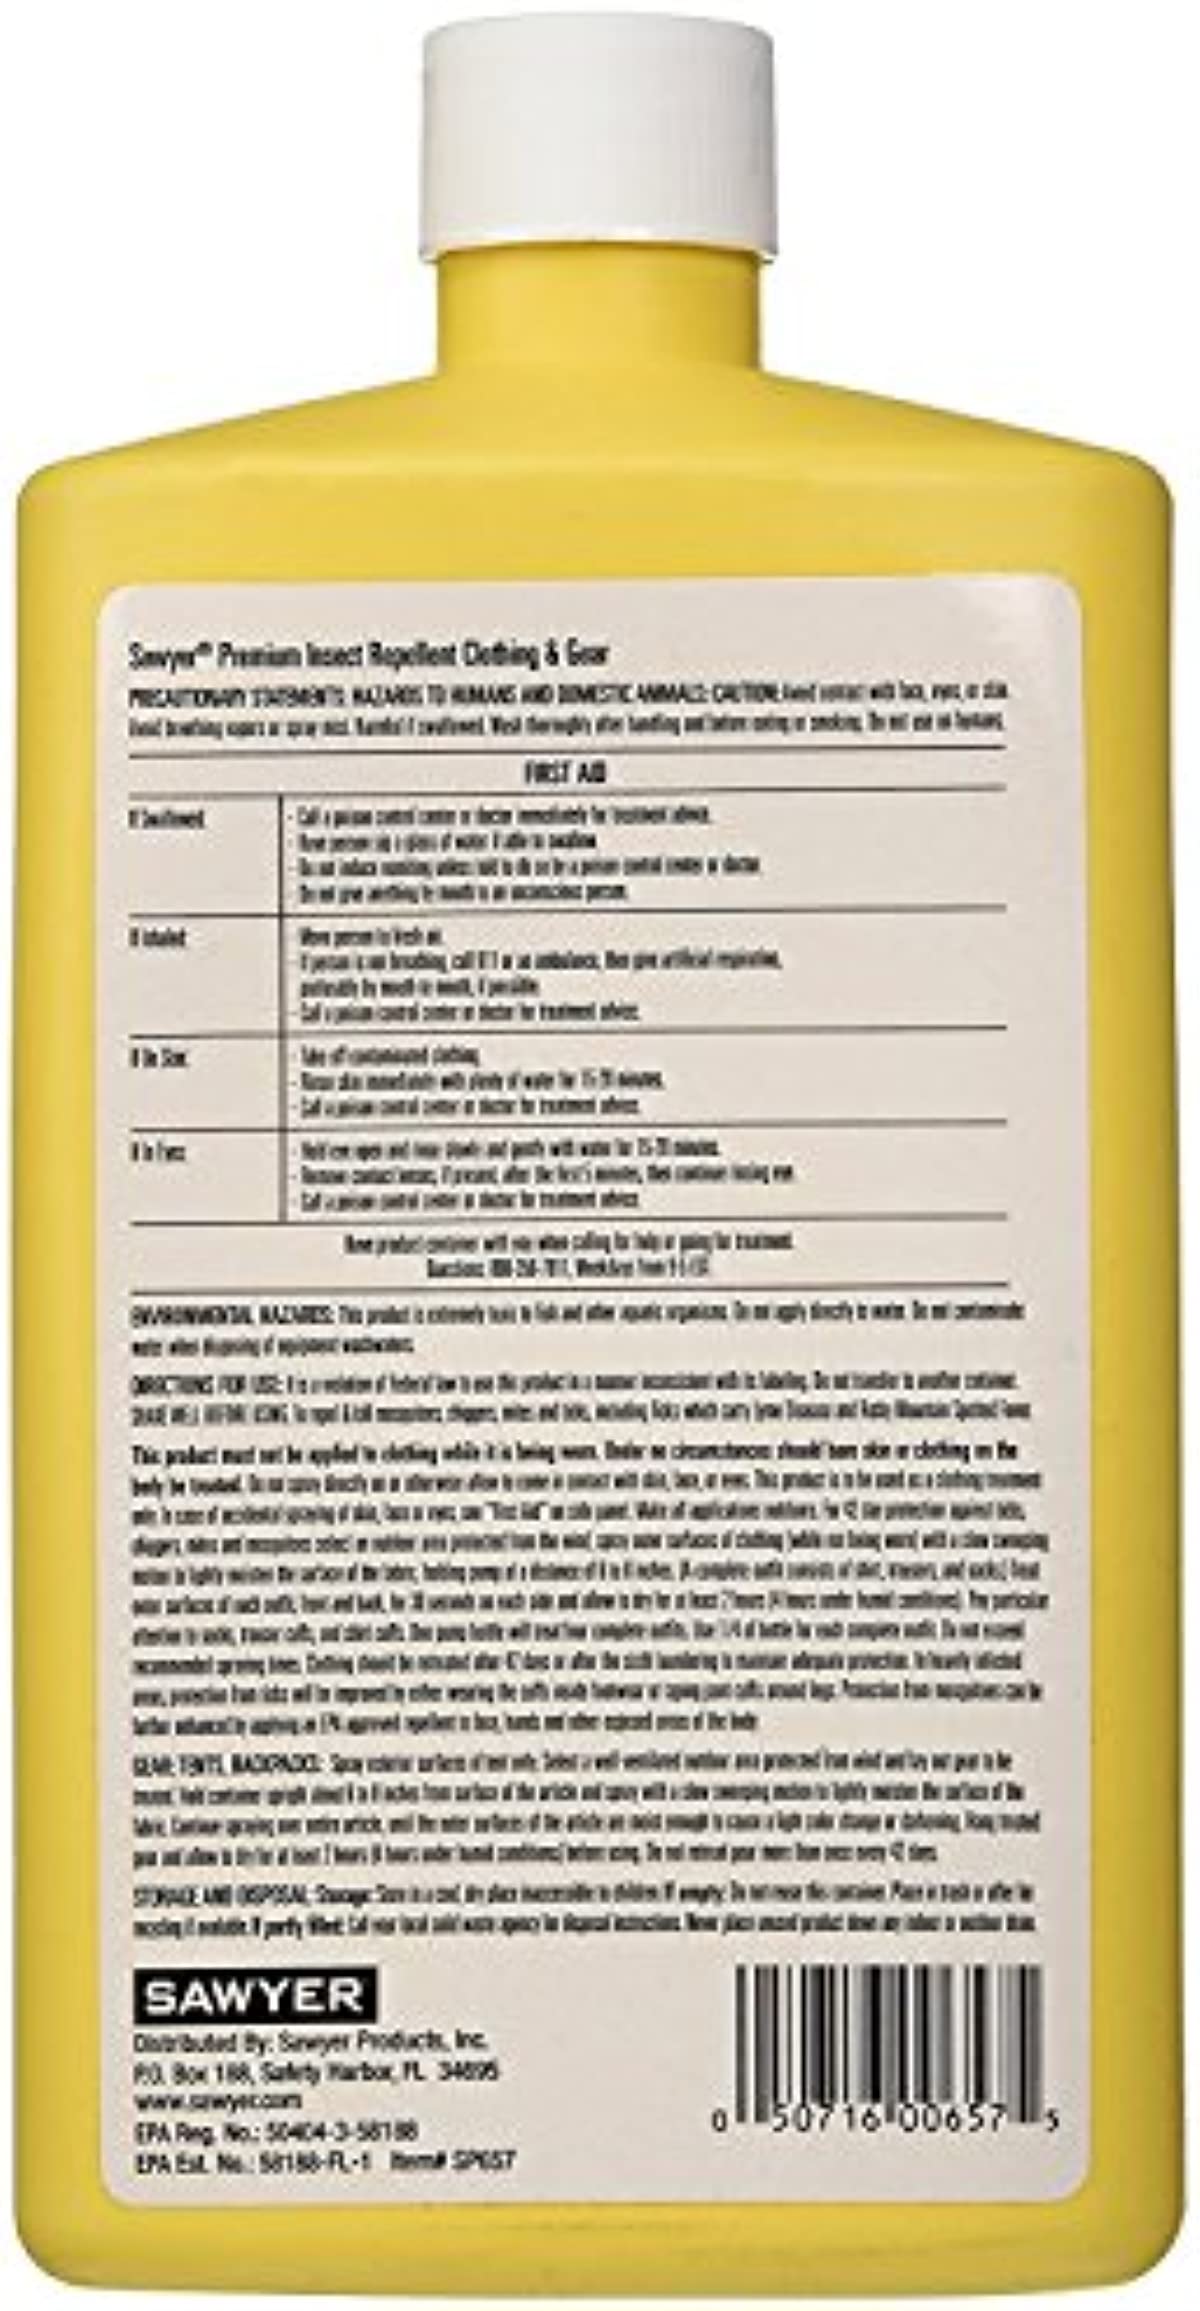 Sawyer Products Premium Permethrin Clothing Insect Repellent (24-Oz Trigger Spray) and Sawyer Products Insect Repellent w/ 20{ab79cc3c793dcbd5207b34a3b3044ded03eee5bfb2b4e8a0790a4d952667b706} Picaridin (4-Oz Lotion) Bundle